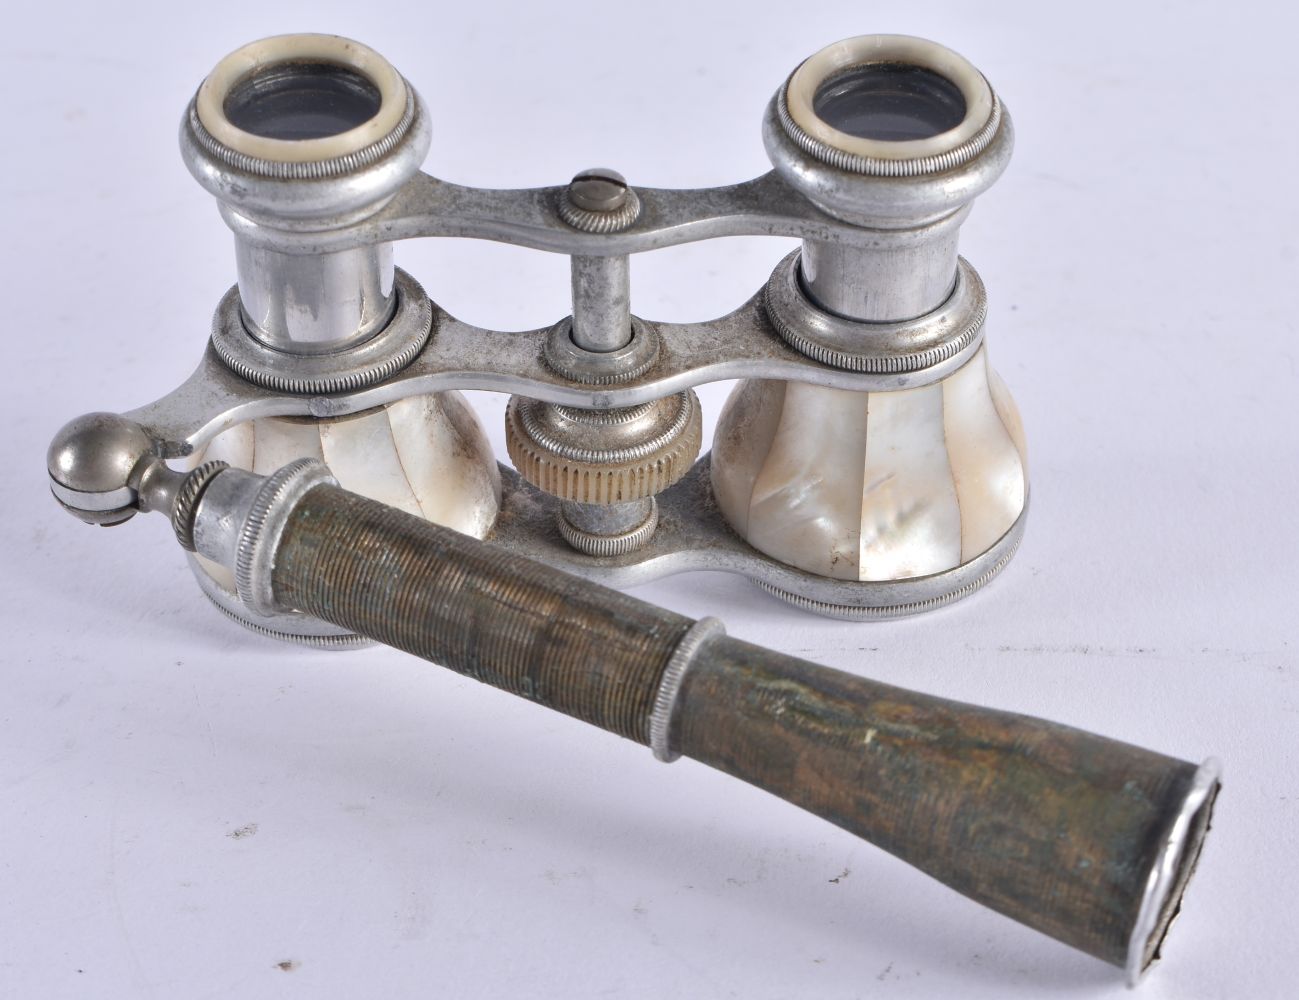 A PAIR OF MOTHER OF PEARL OPERA GLASSES. 21 cm x 8 cm.